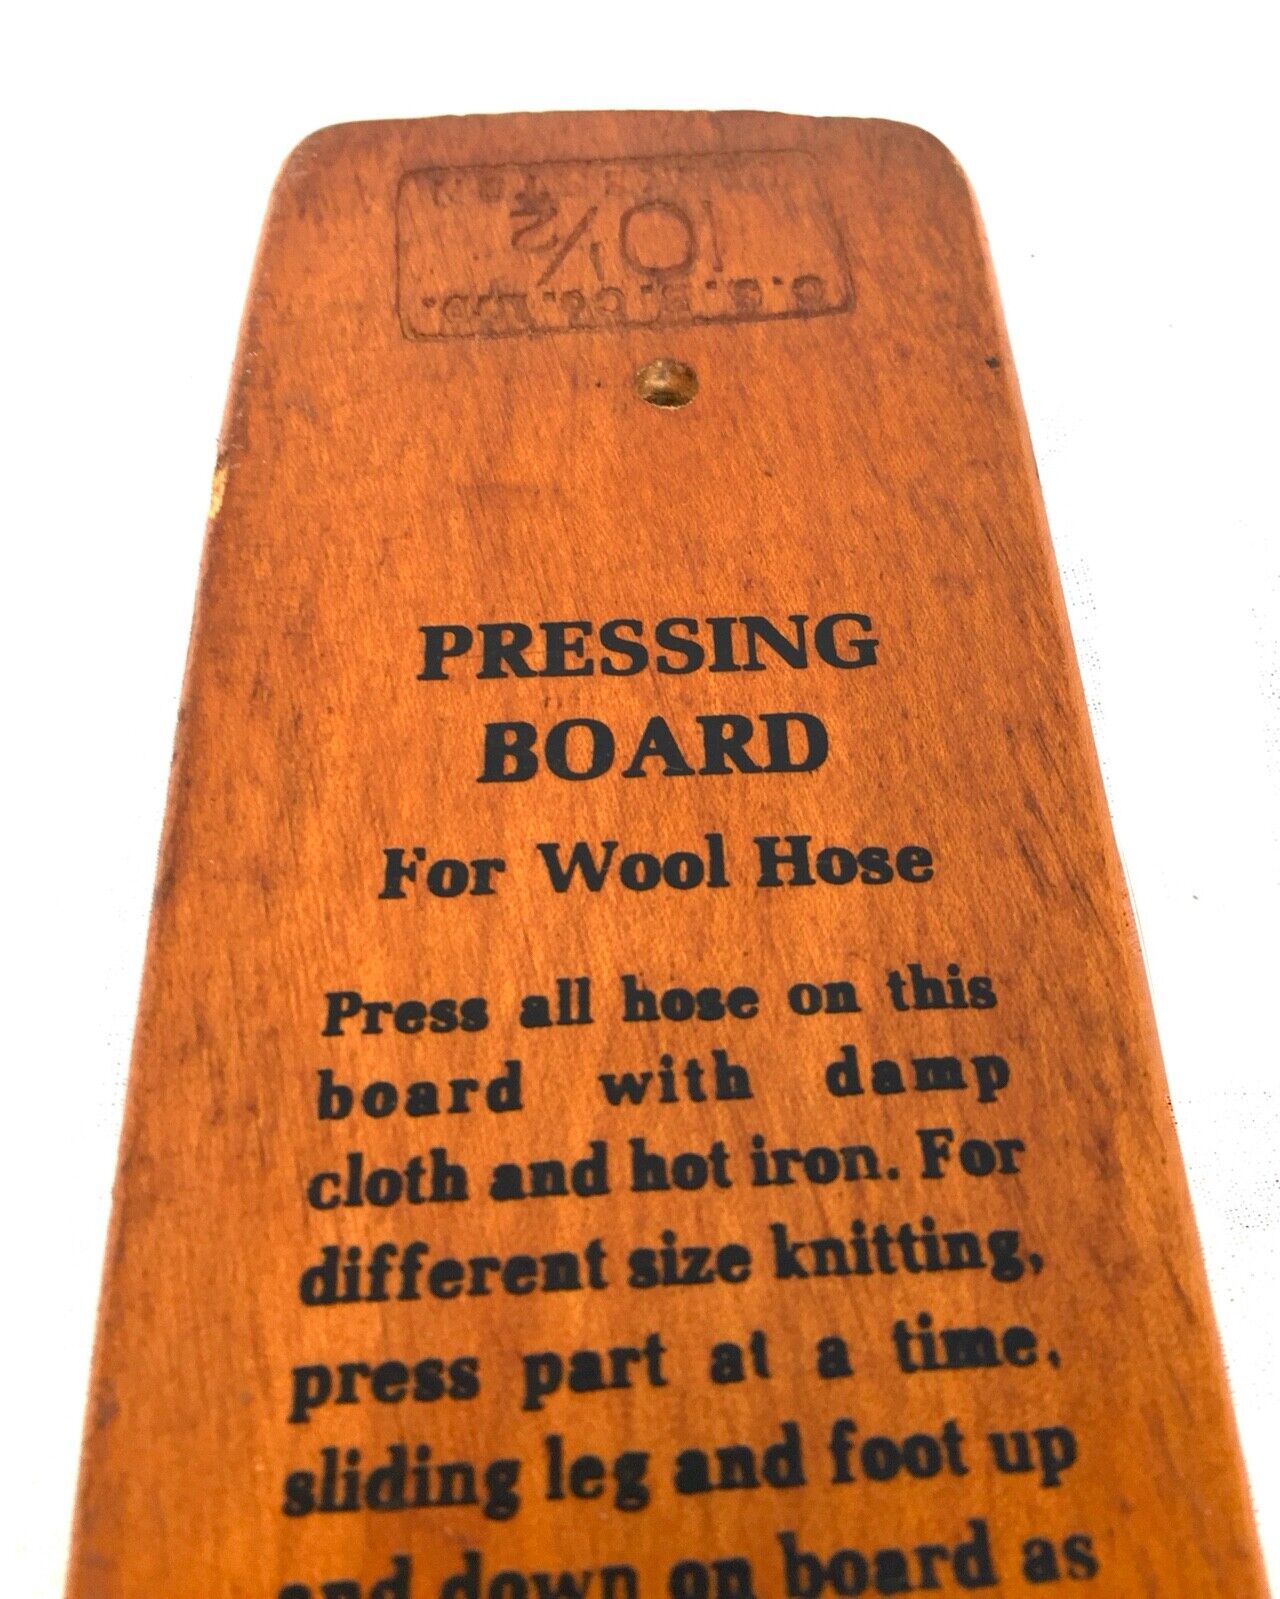 Antique Pressing Board by Penobscot Spinning Company for Wool / Sewing / Stretch